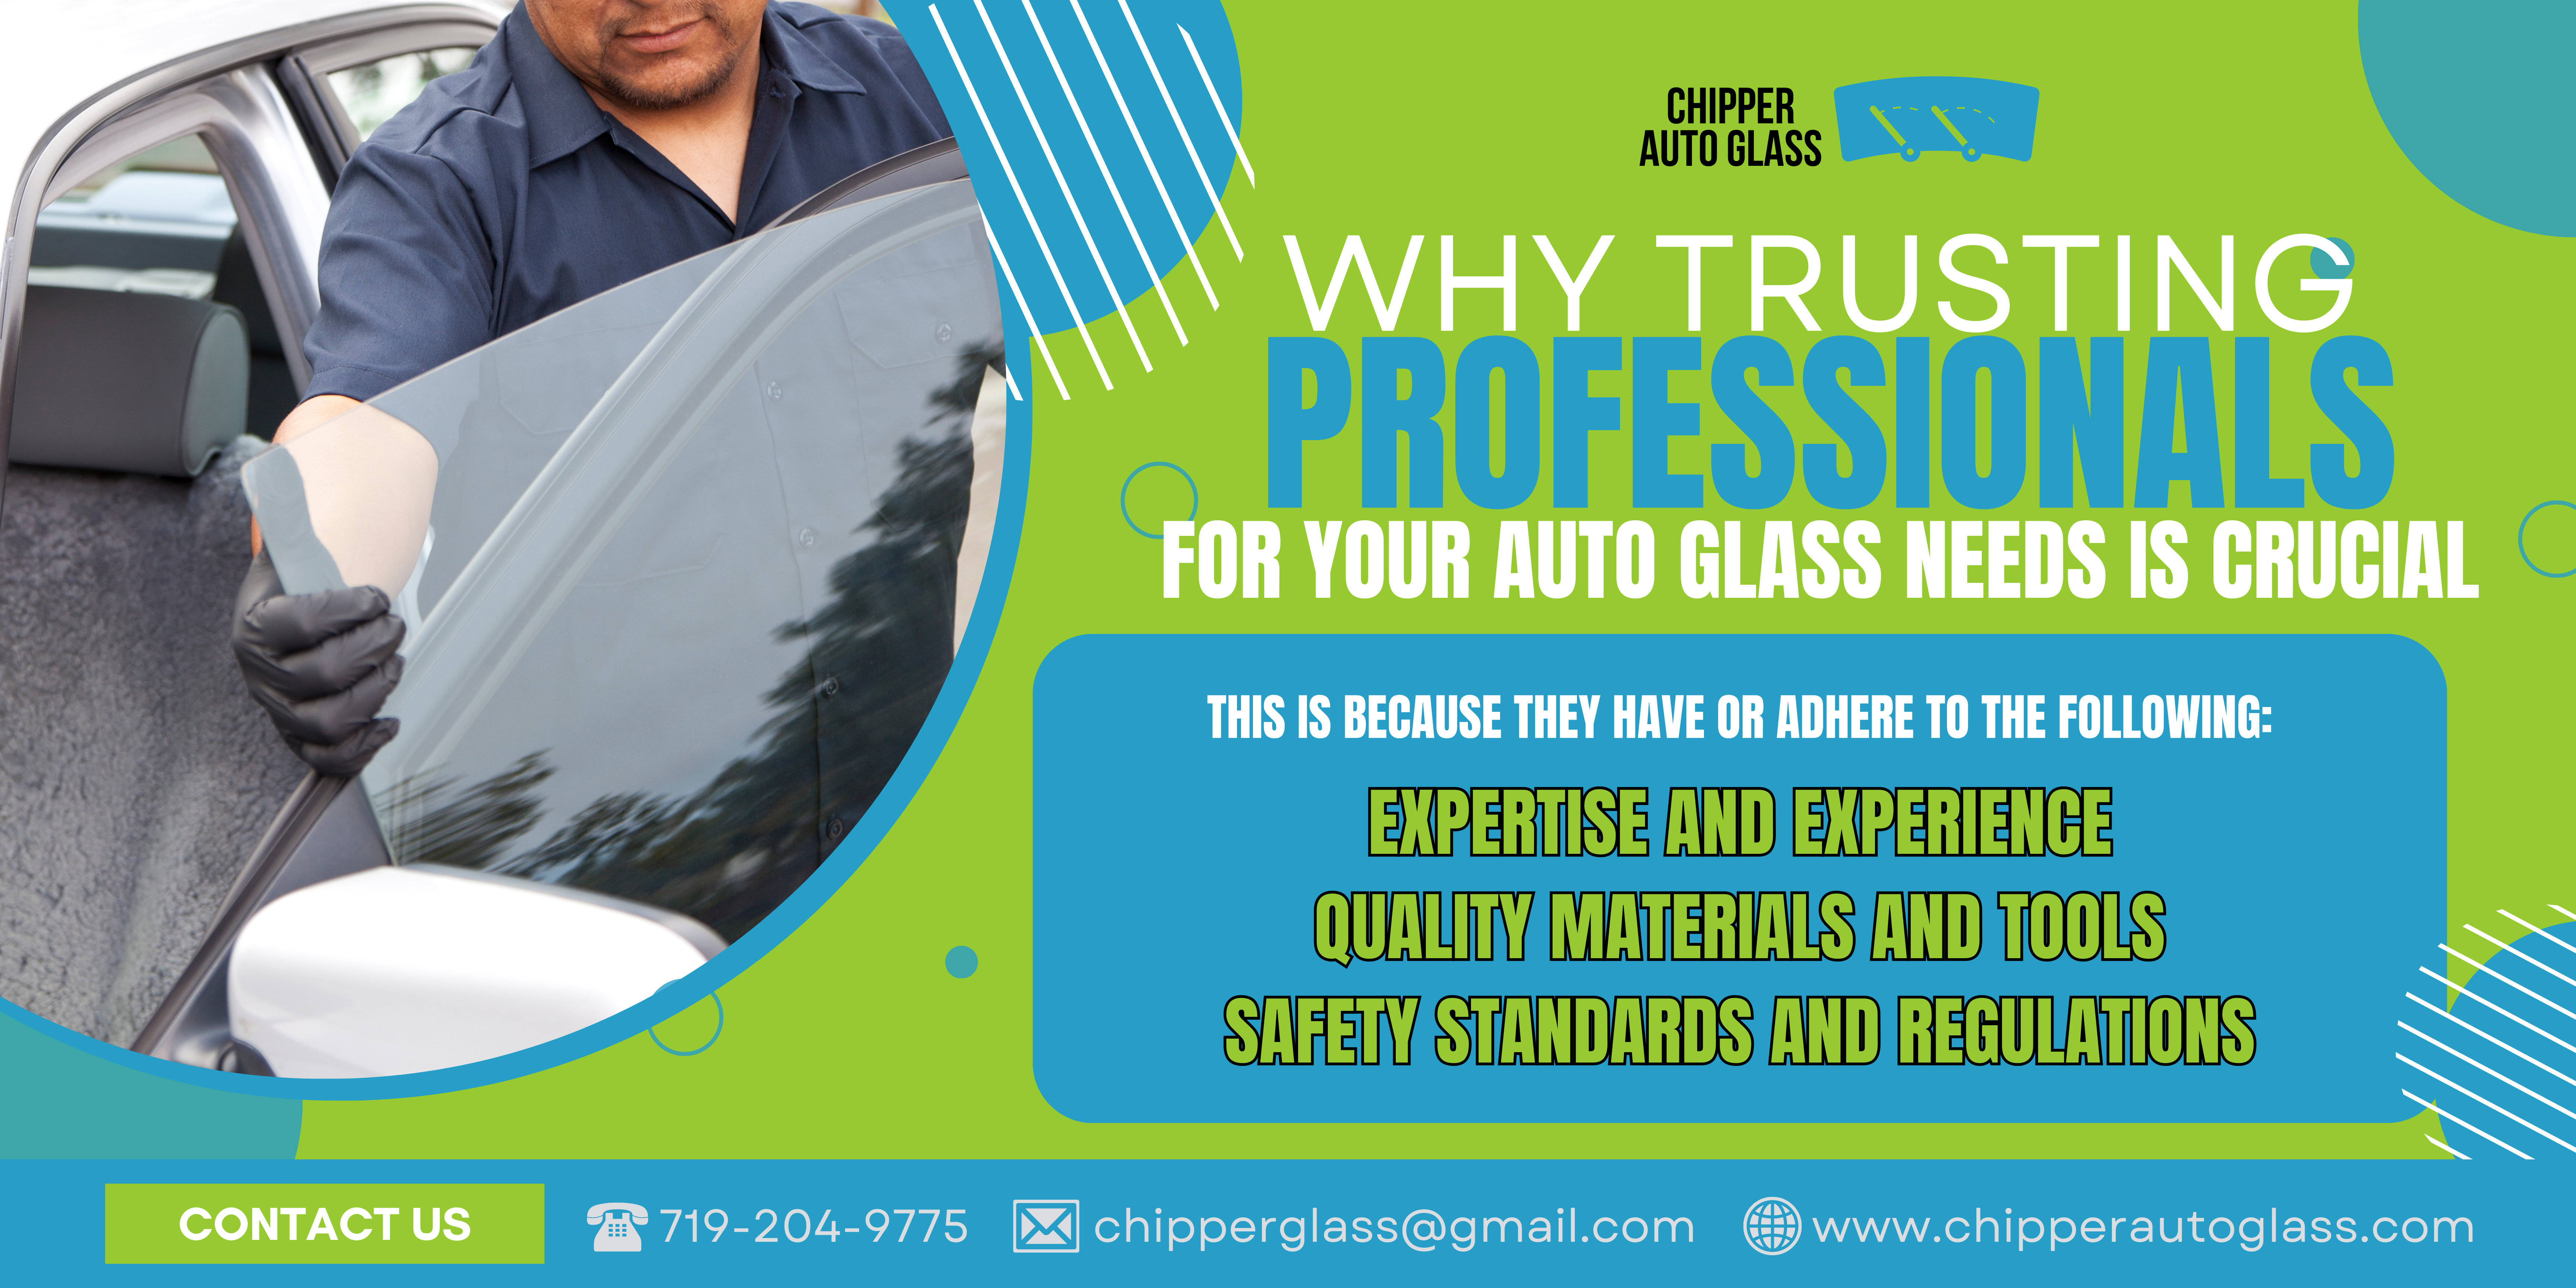 Signs That Indicate the Need for Side Auto Glass Repair or Replacement